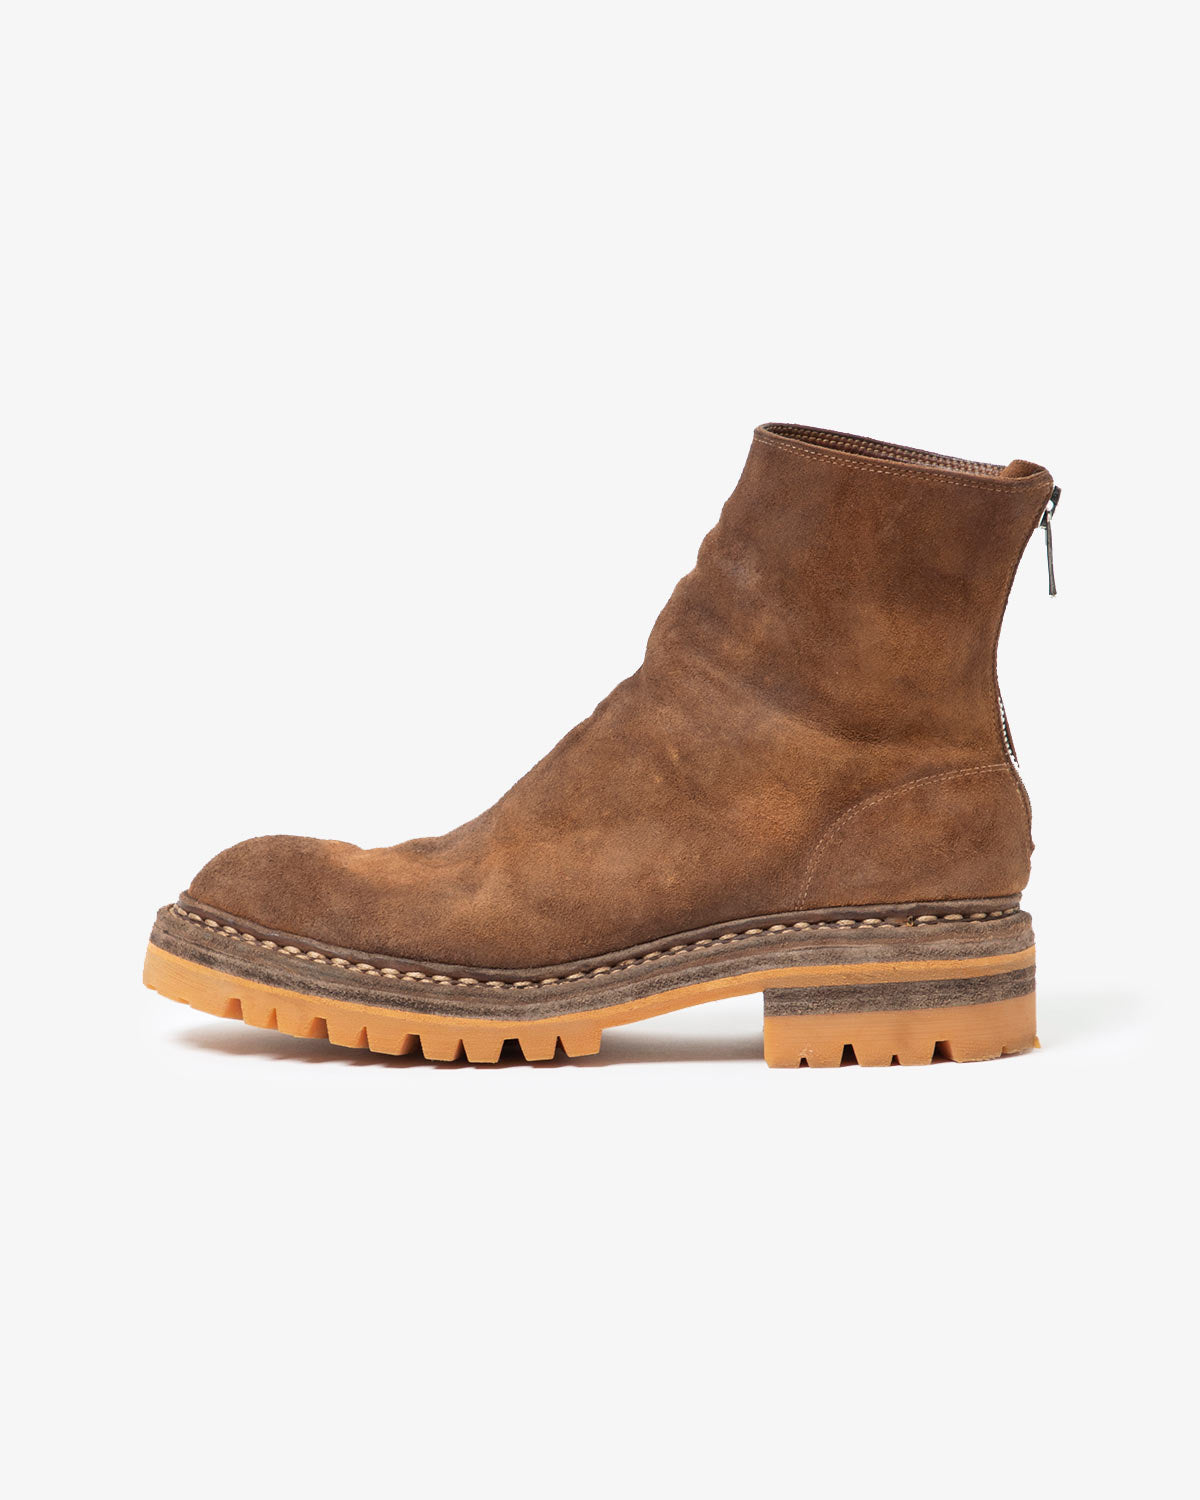 BACK ZIP MIDDLE BOOTS HORSE LEATHER by GUIDI